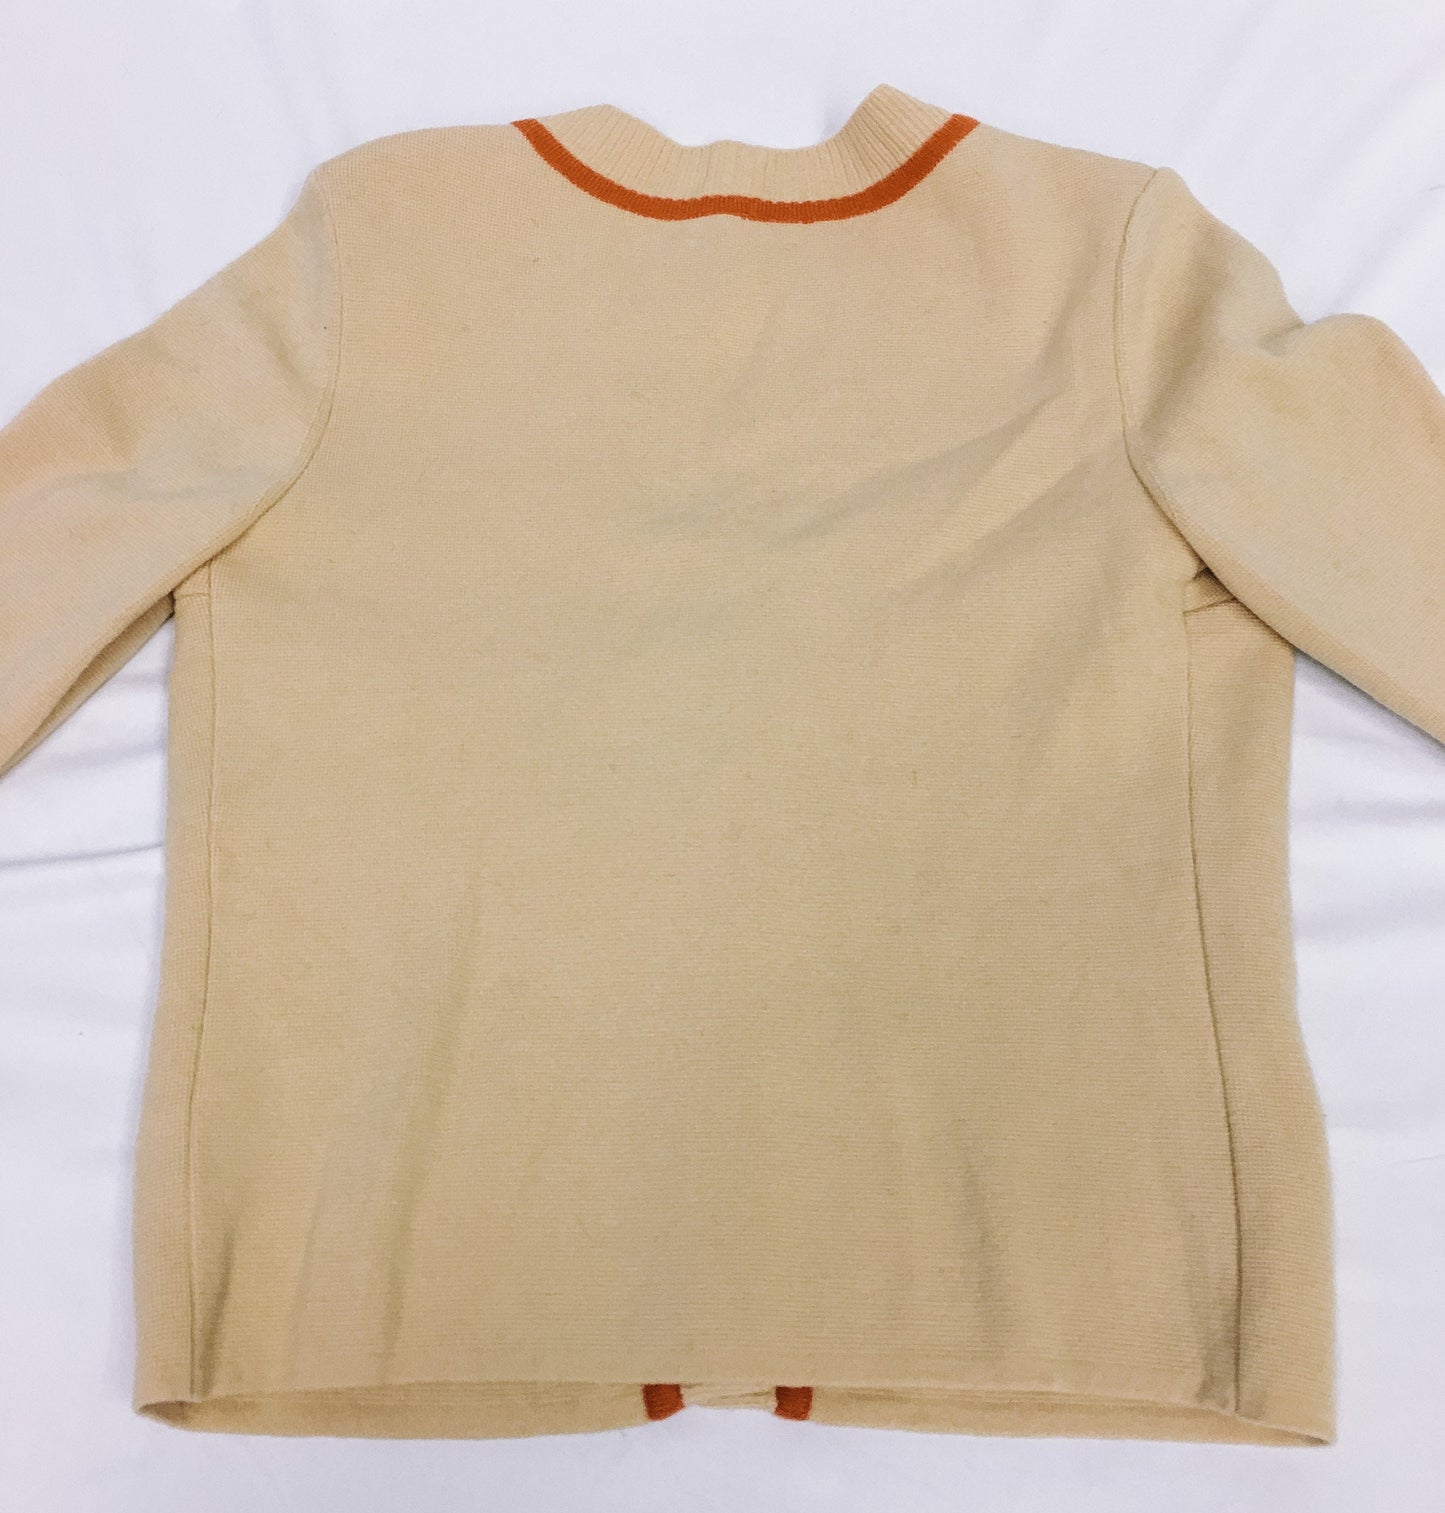 Vintage Italian Pavilion 100% Wool Beige and Orange Button Cardigan Sweater, Sz. Vintage 14, Made in Italy